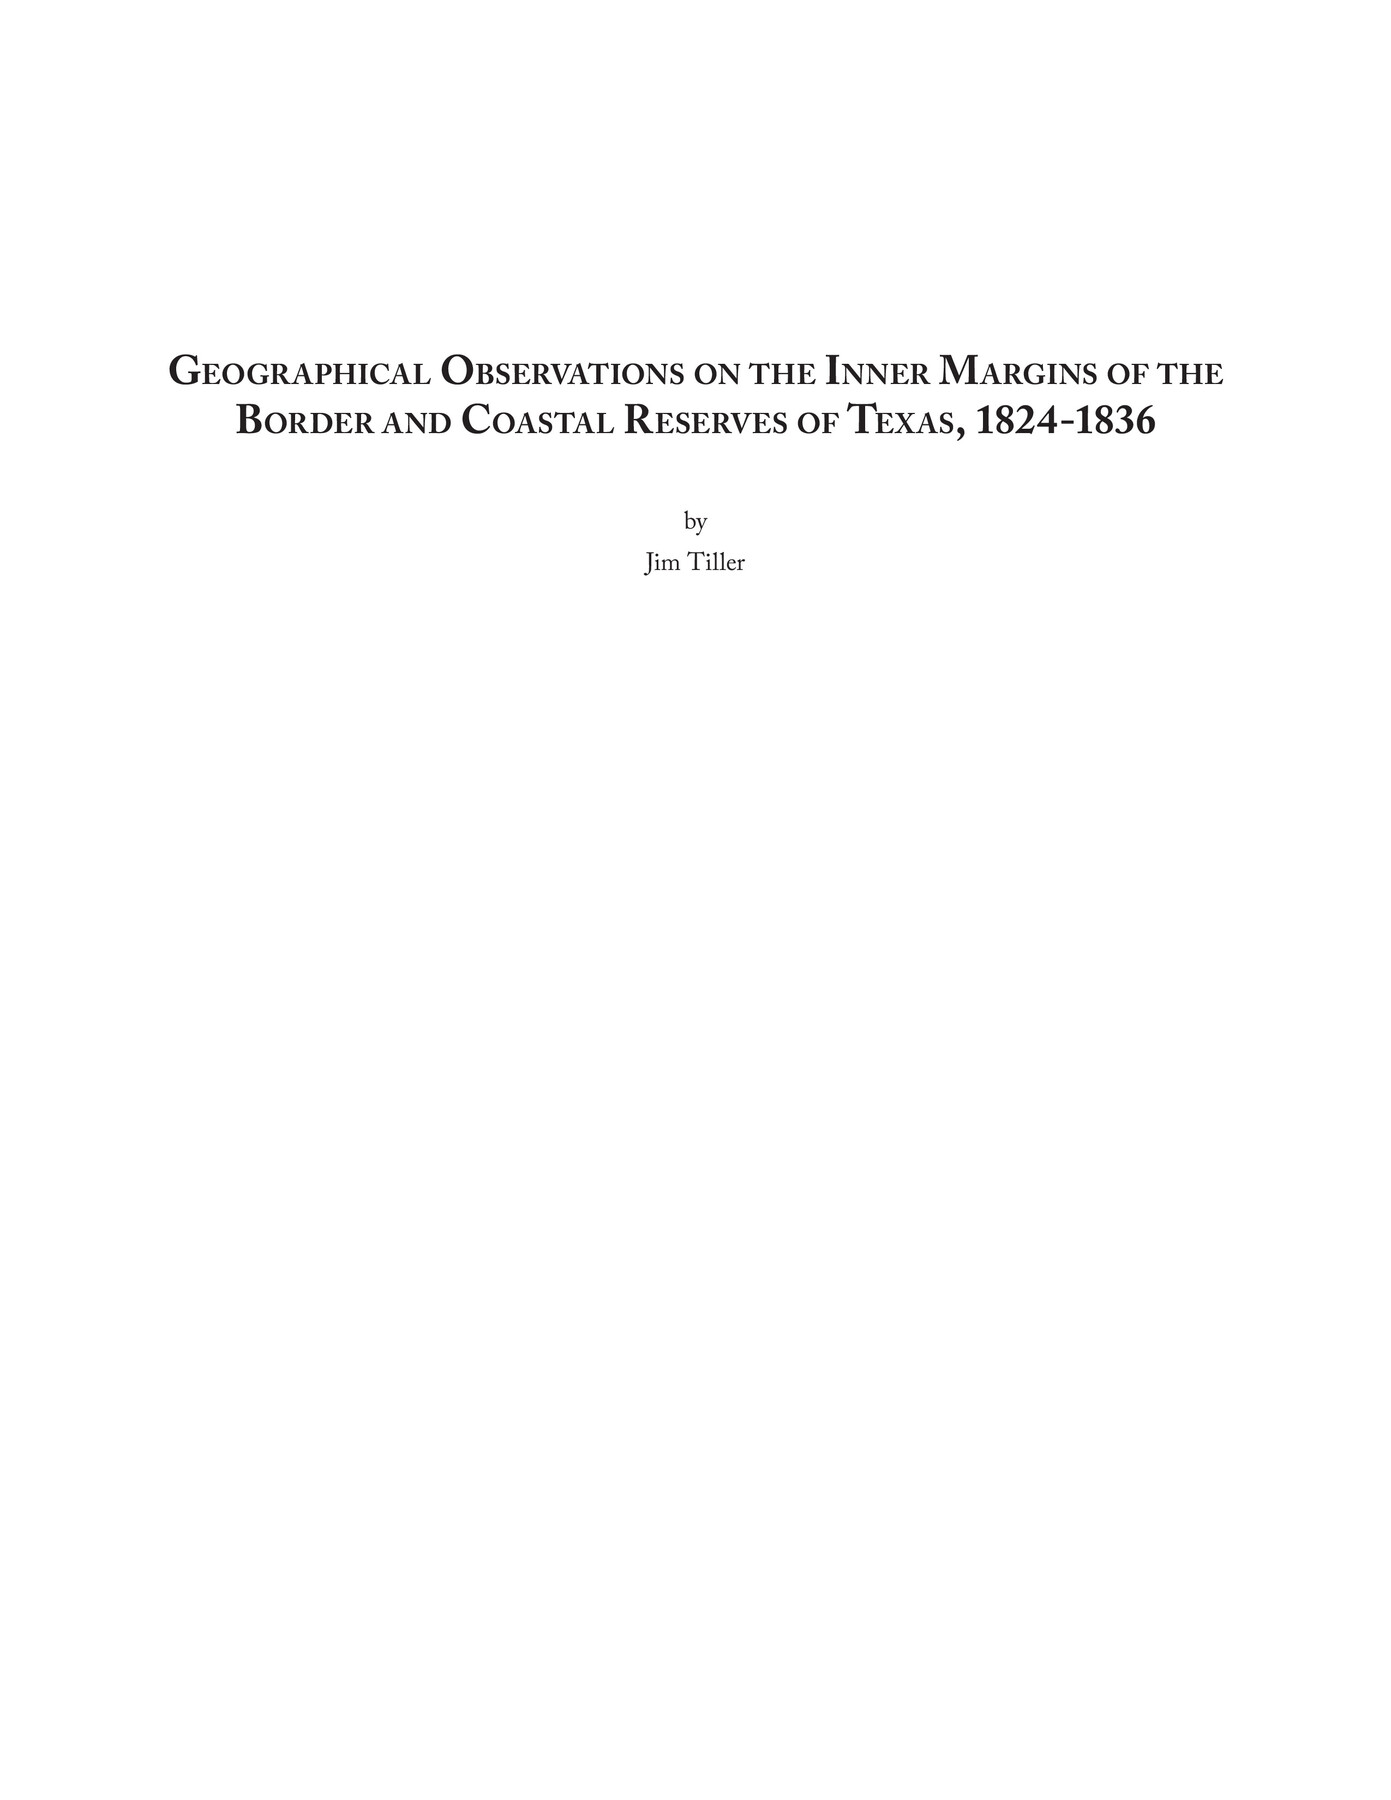 97131, Geographical Observations on the Inner Margins of the Border and Coastal Reserves of Texas, 1824-1836